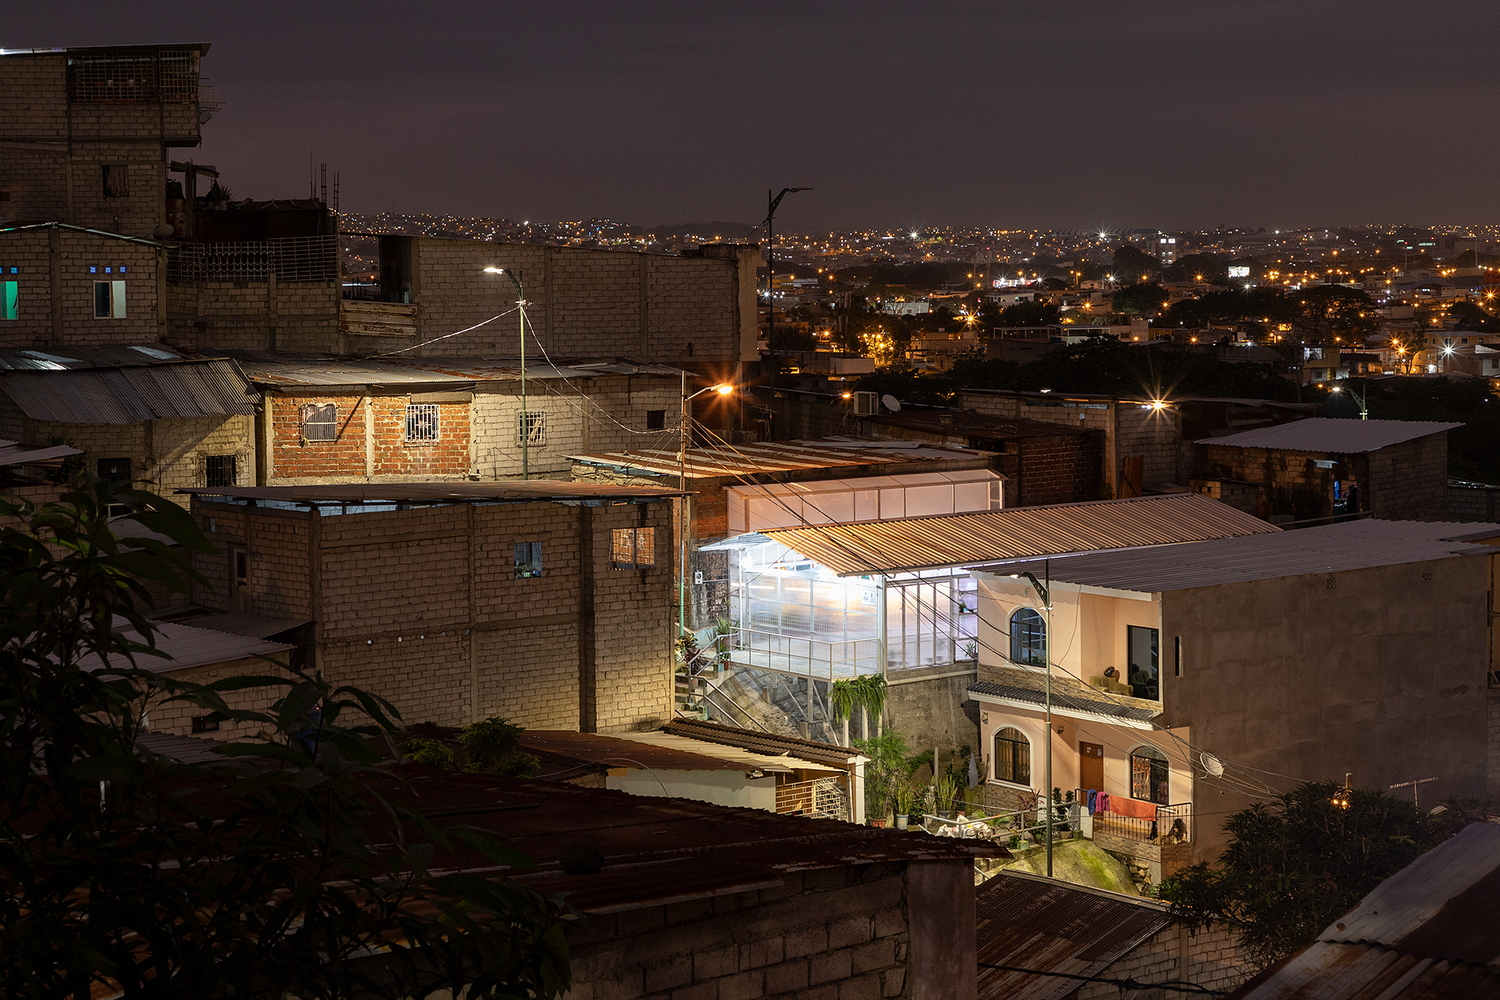 At night, this communal house can create security and dynamism for the environment due to the luminosity that is so prominent in the staircase area